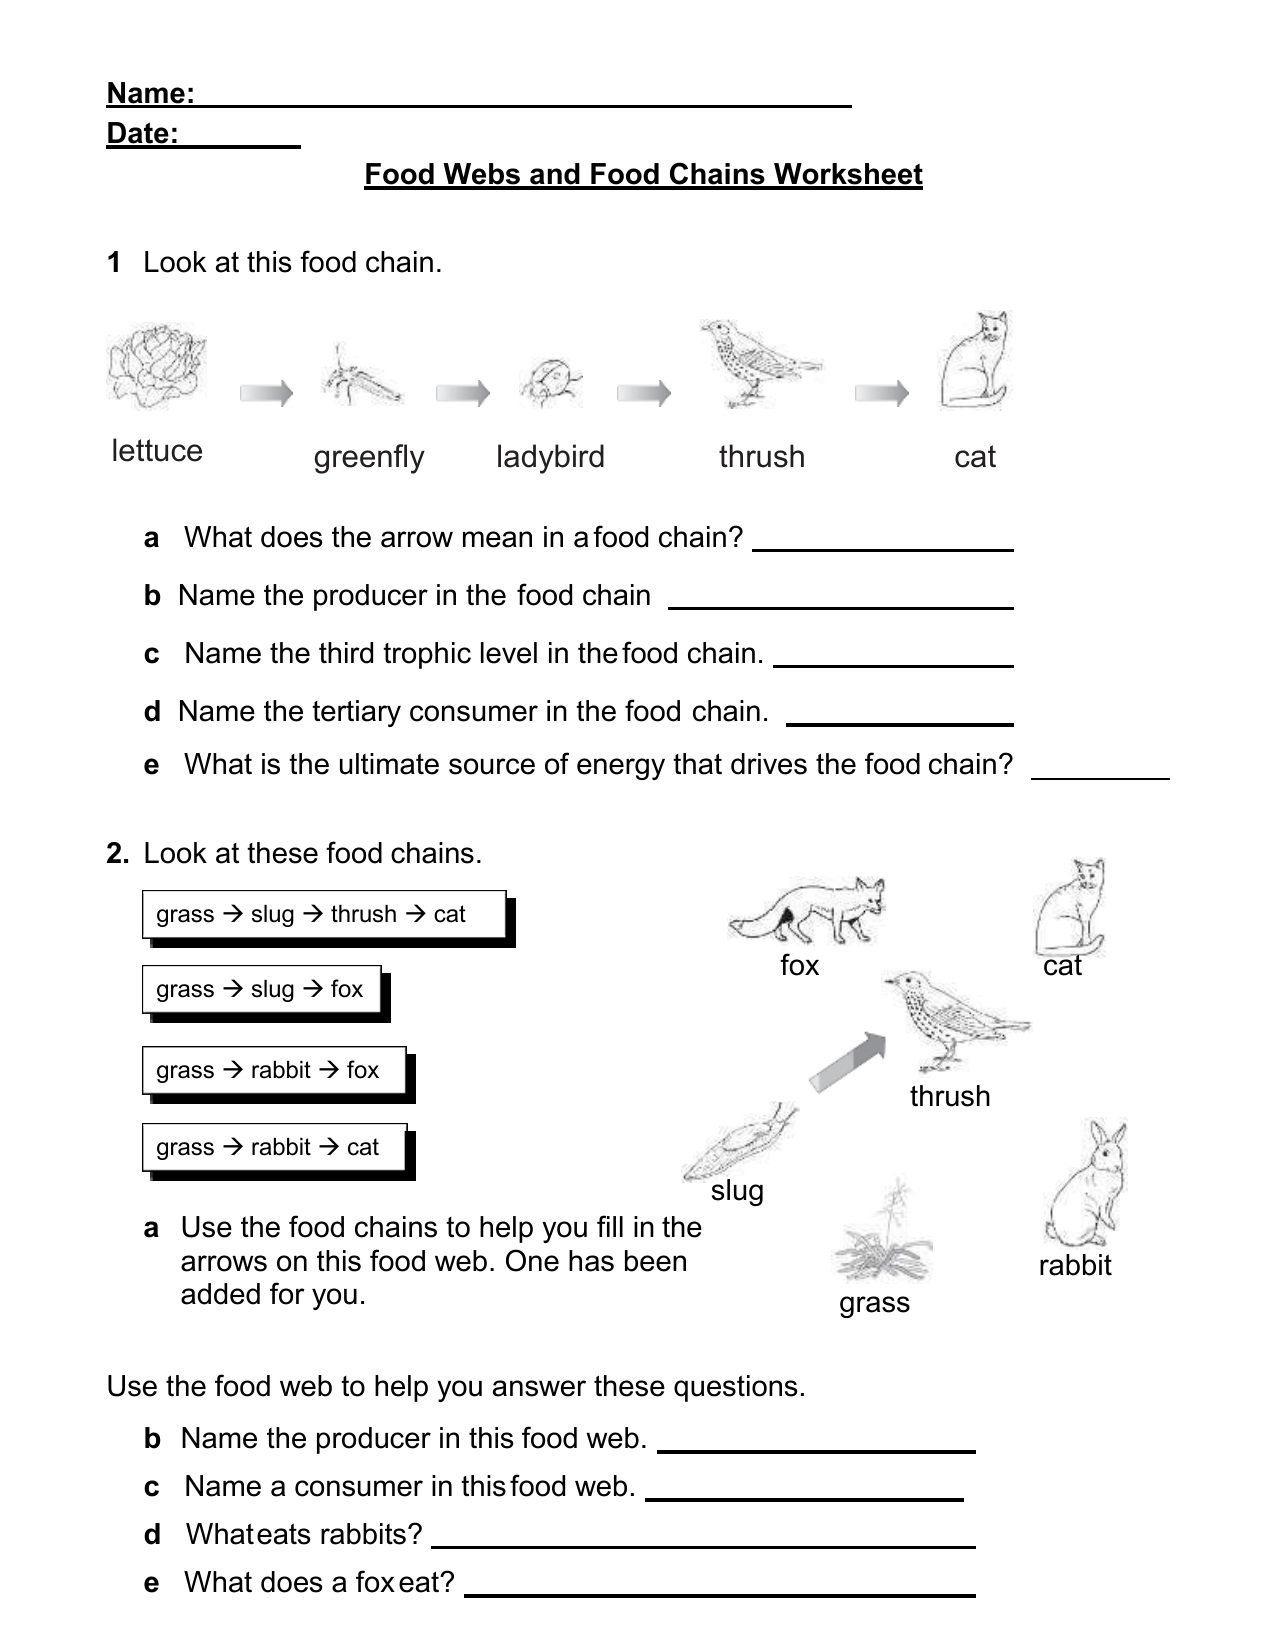 food-webs-and-food-chains-worksheet-answer-key-backpage-gia-blevins